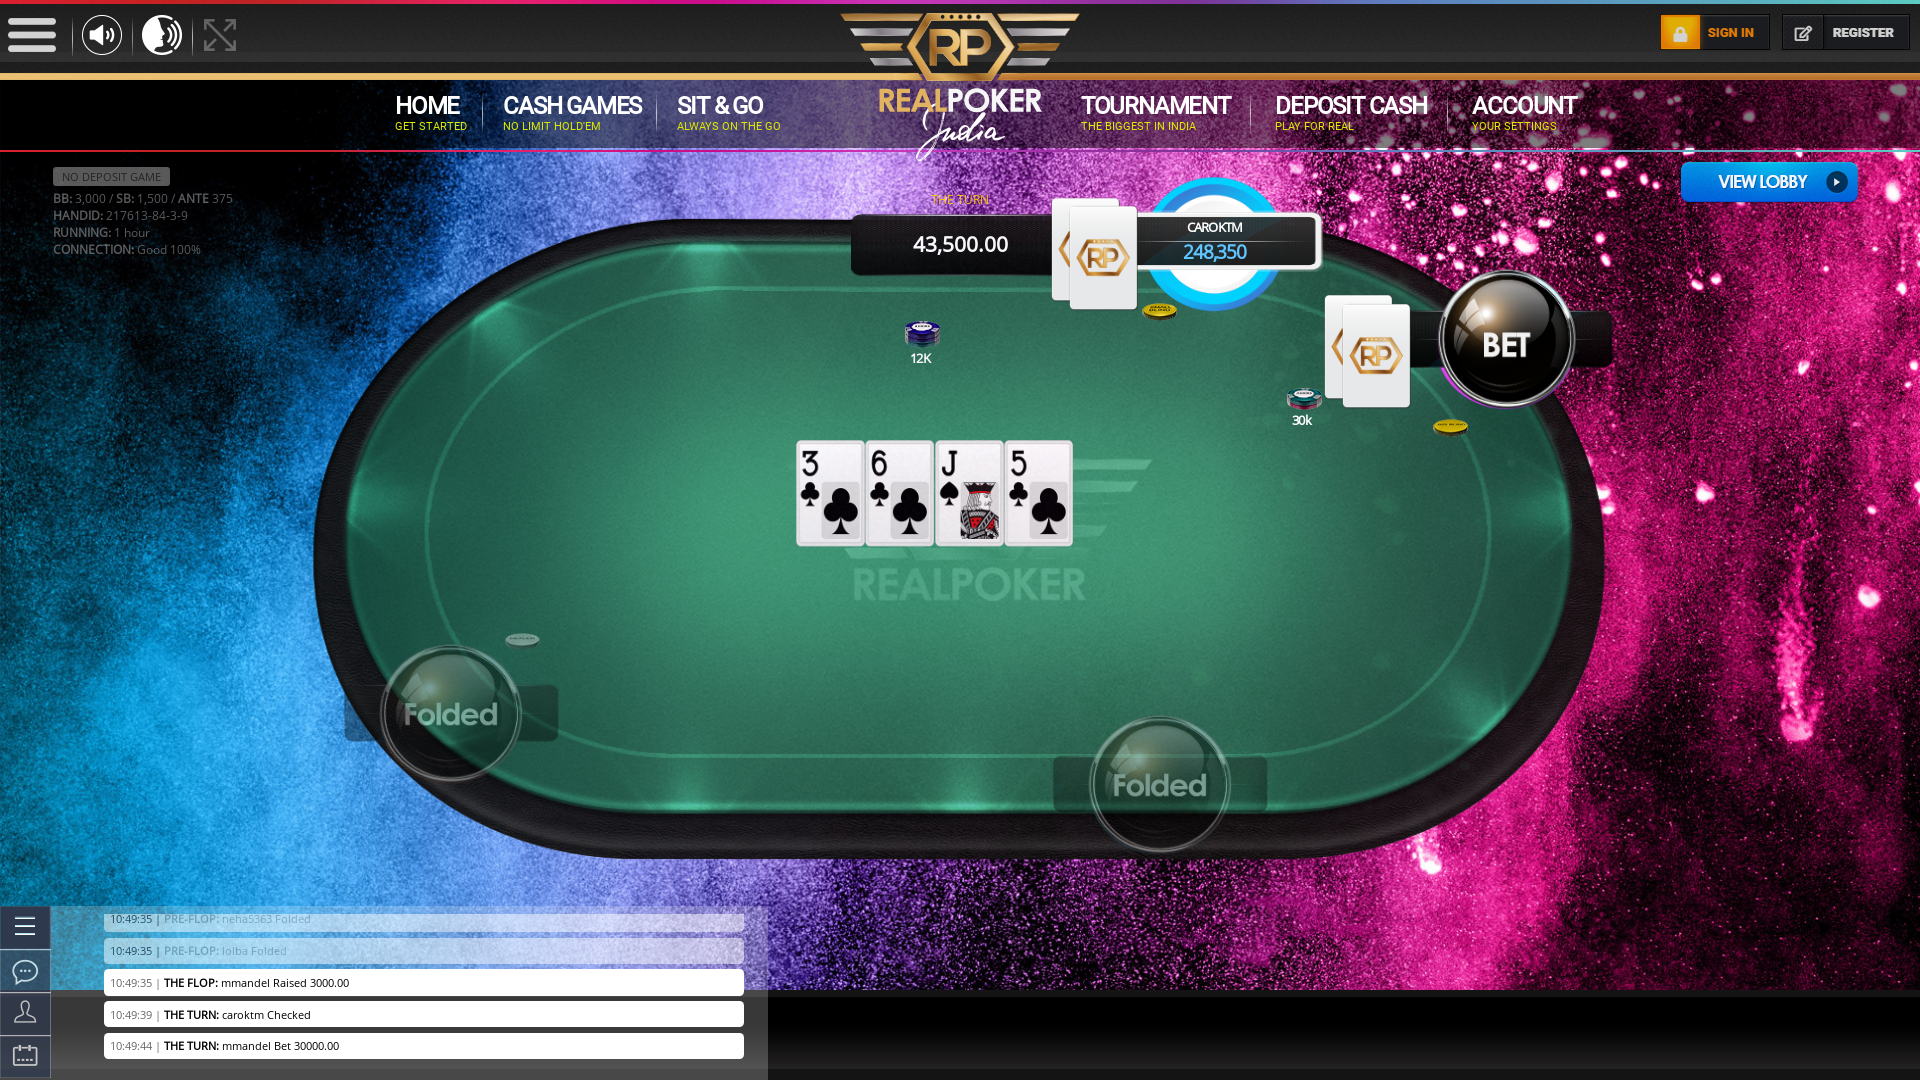 Real poker 10 player table in the 7 match